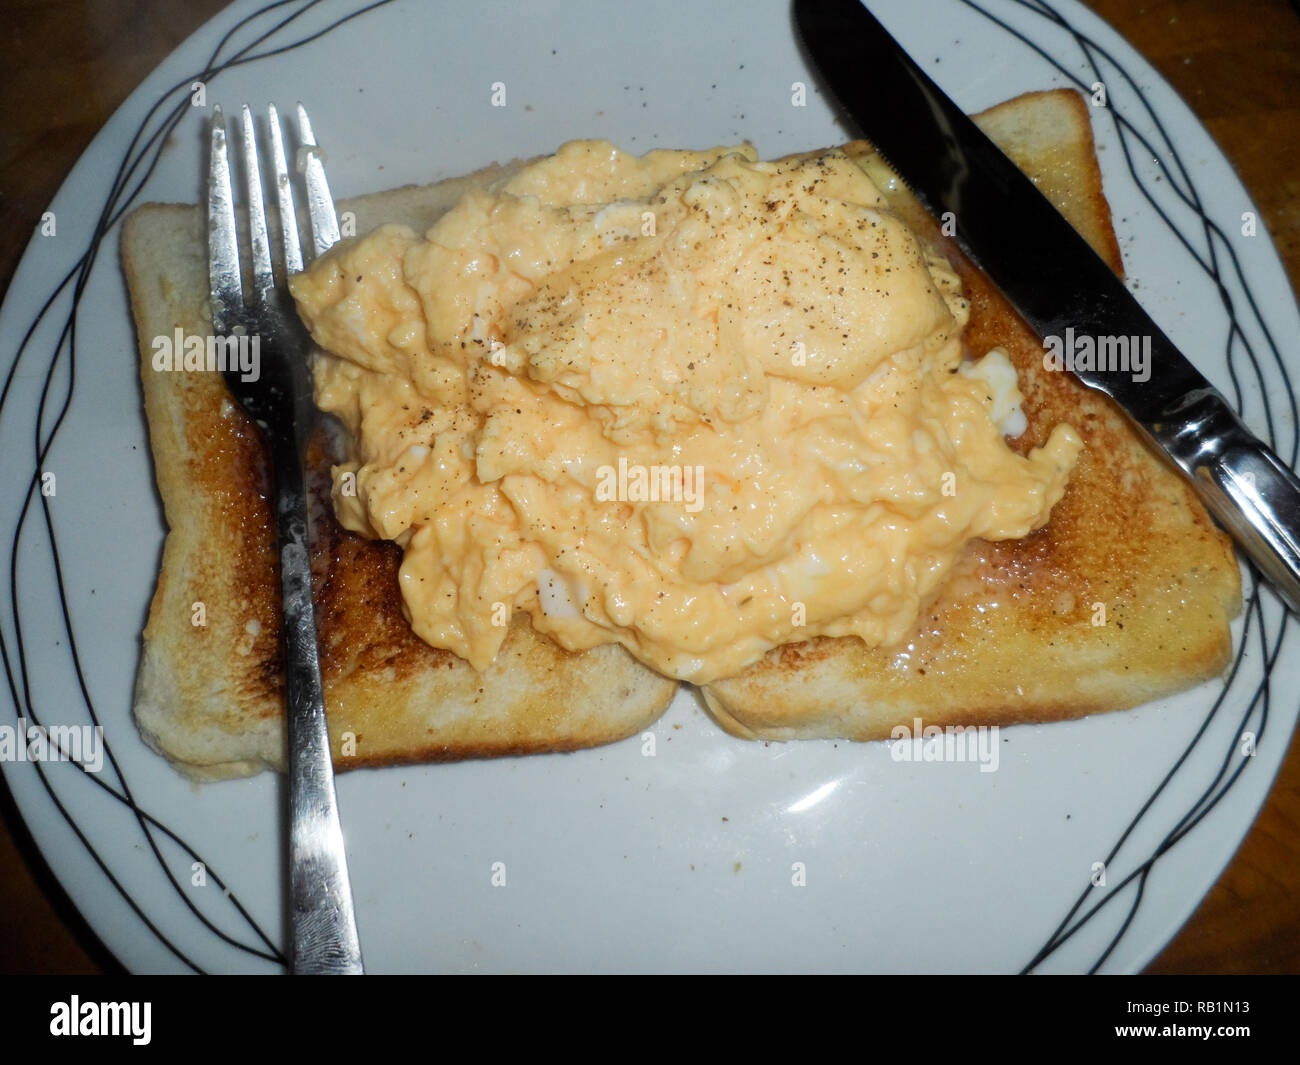 A popular English breakfast of Scrambled egg on two slices of buttered toast. Stock Photo